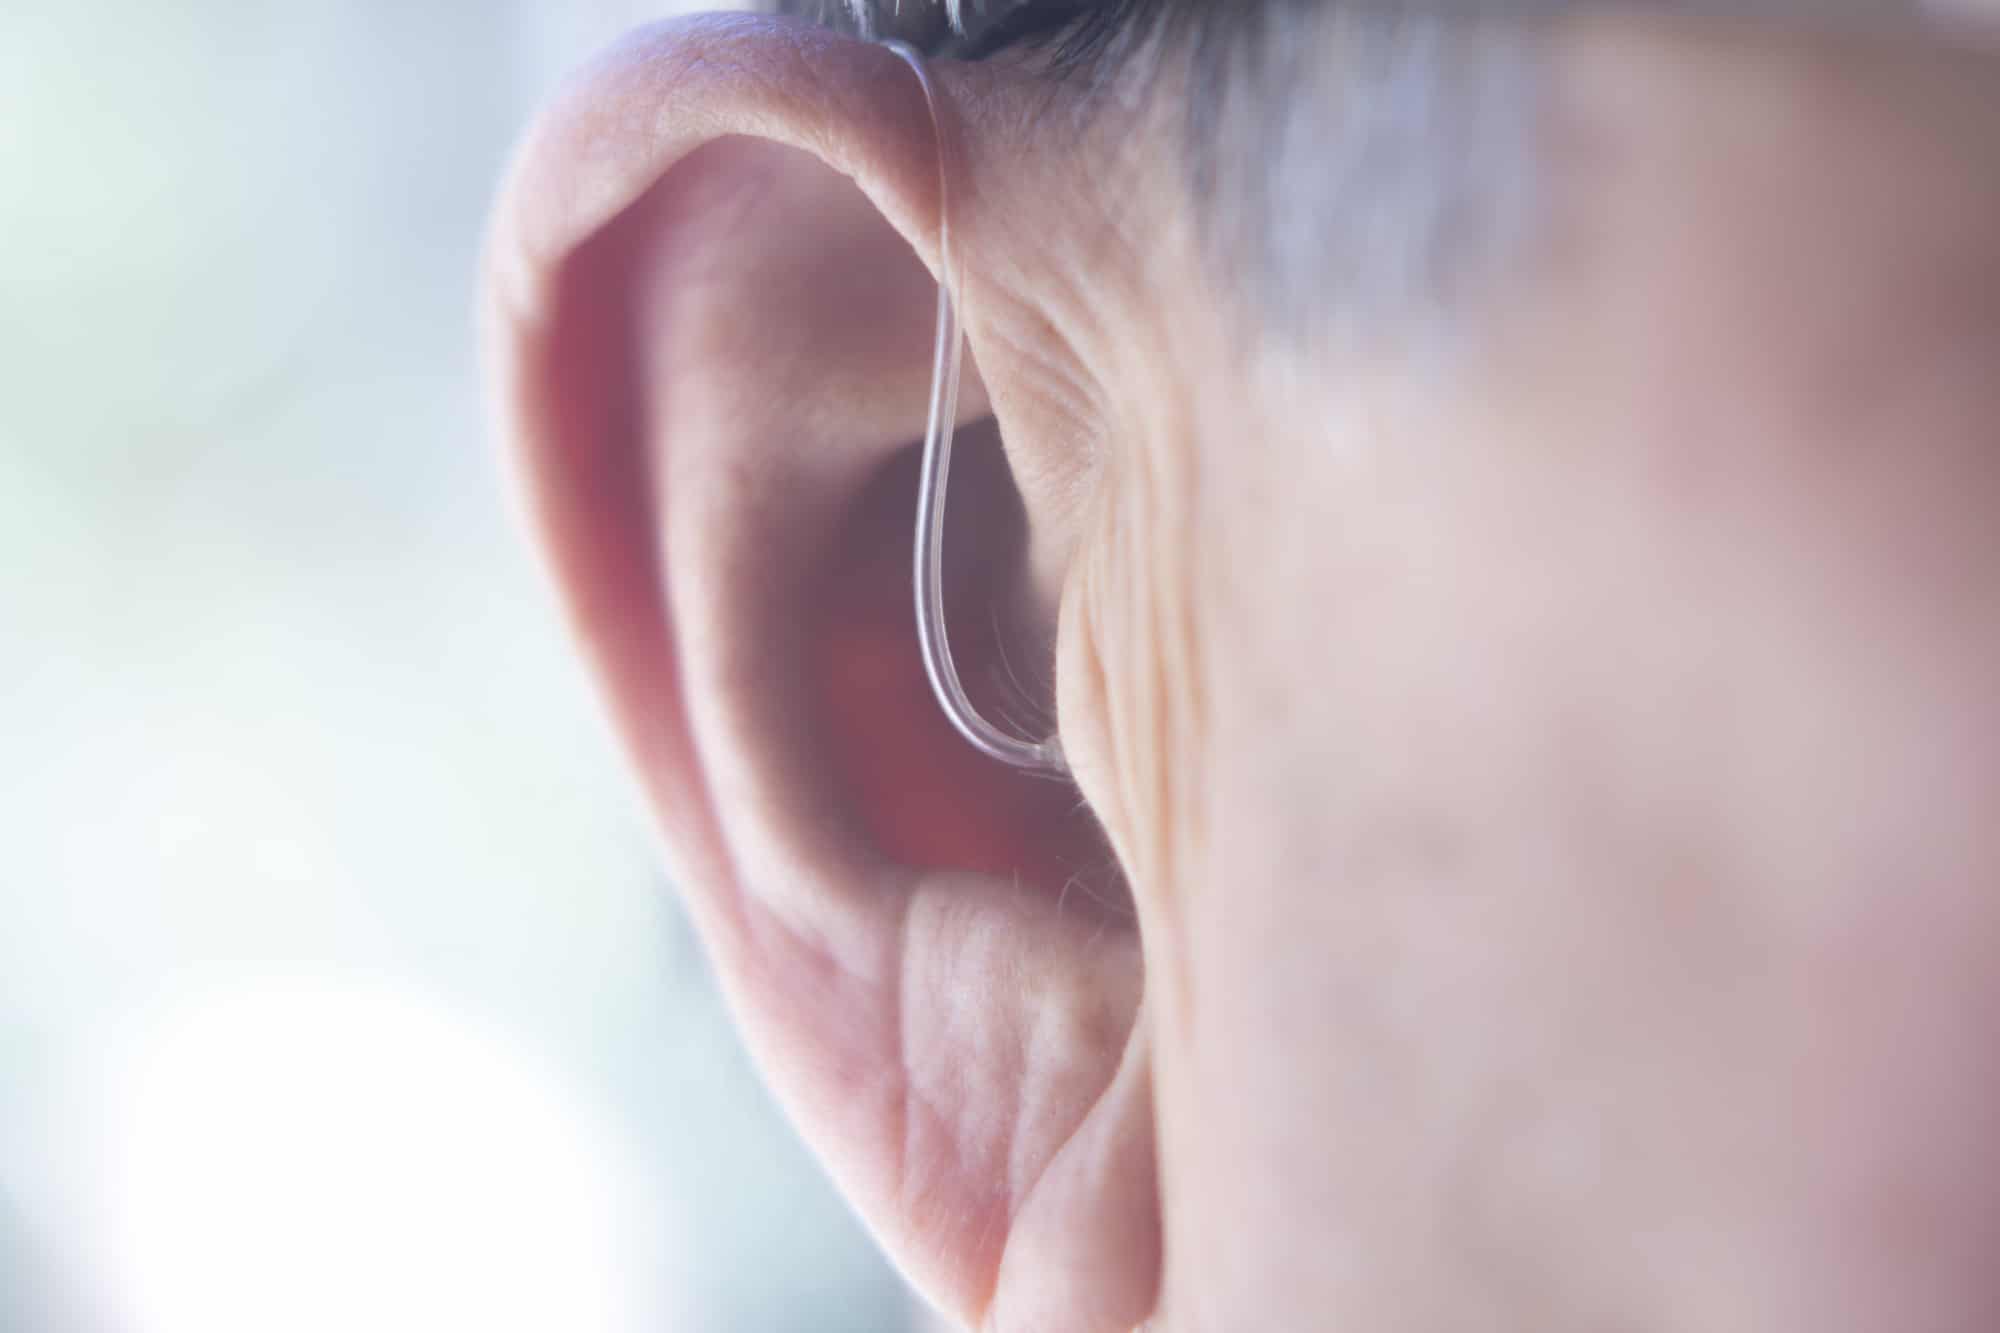 Does Medicare Cover Hearing Aids for Seniors Who Need Hearing Assistance?